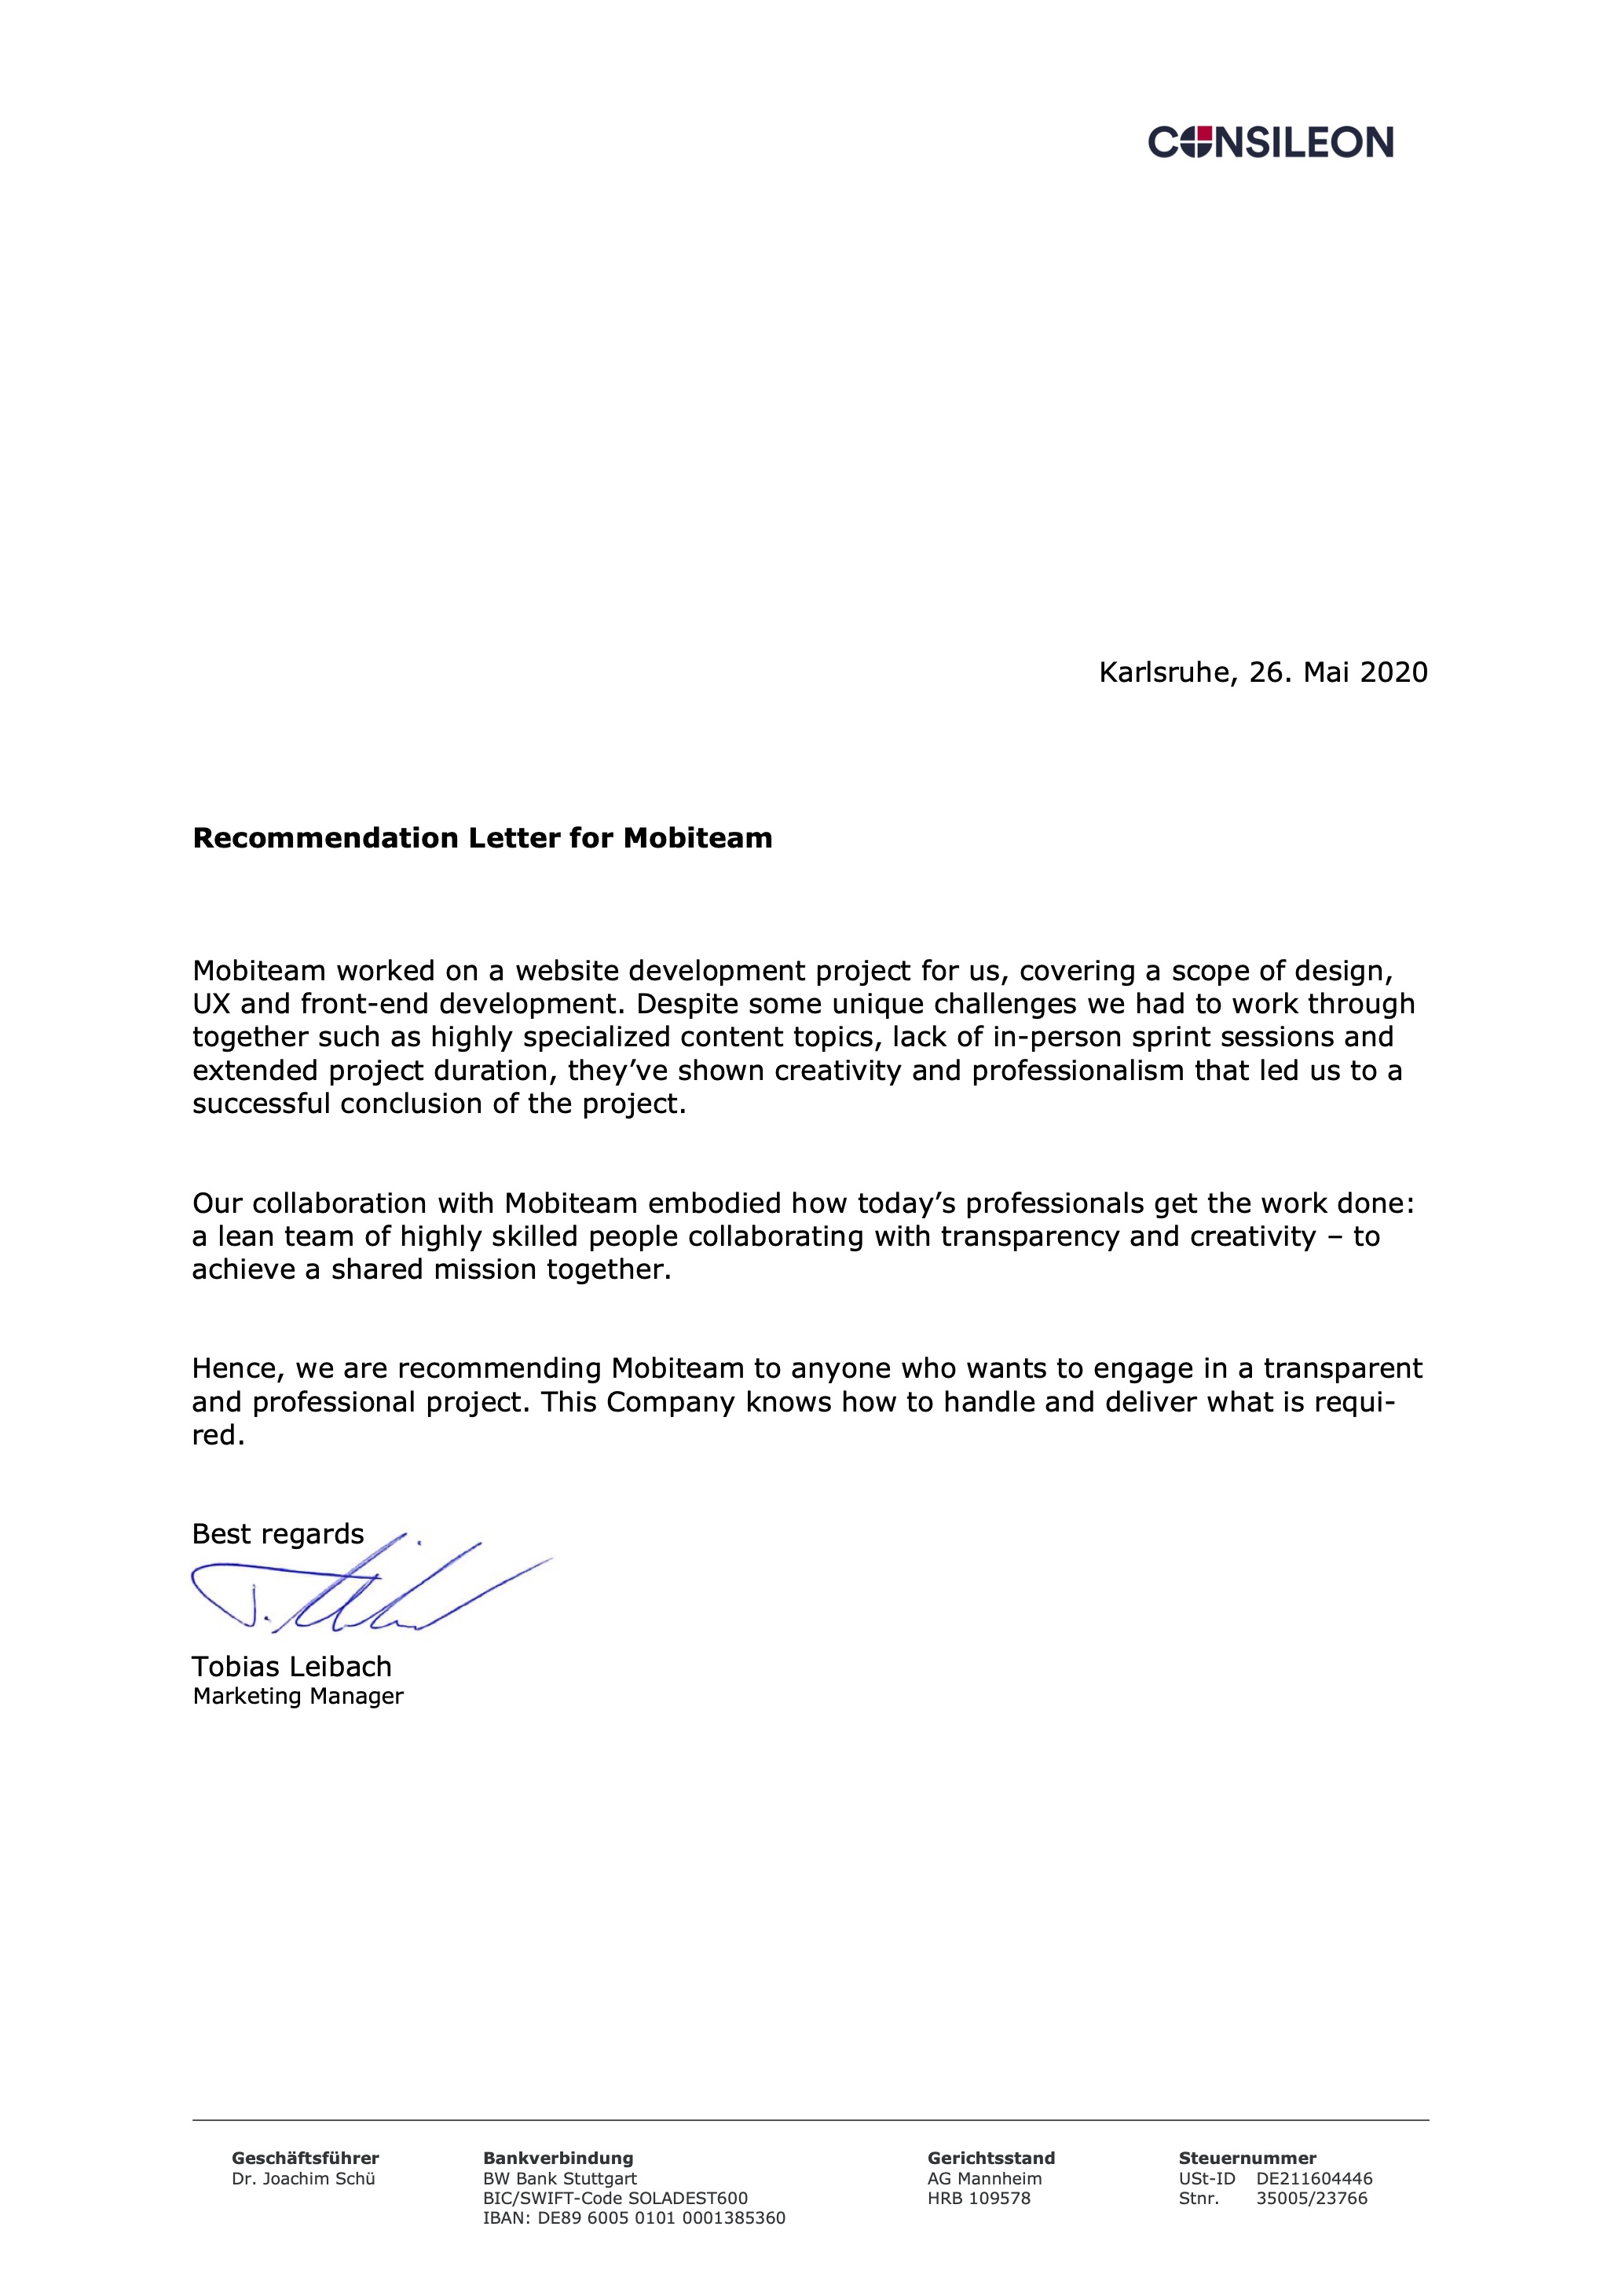 20200526-recommendation-letter-for-mobiteam-2